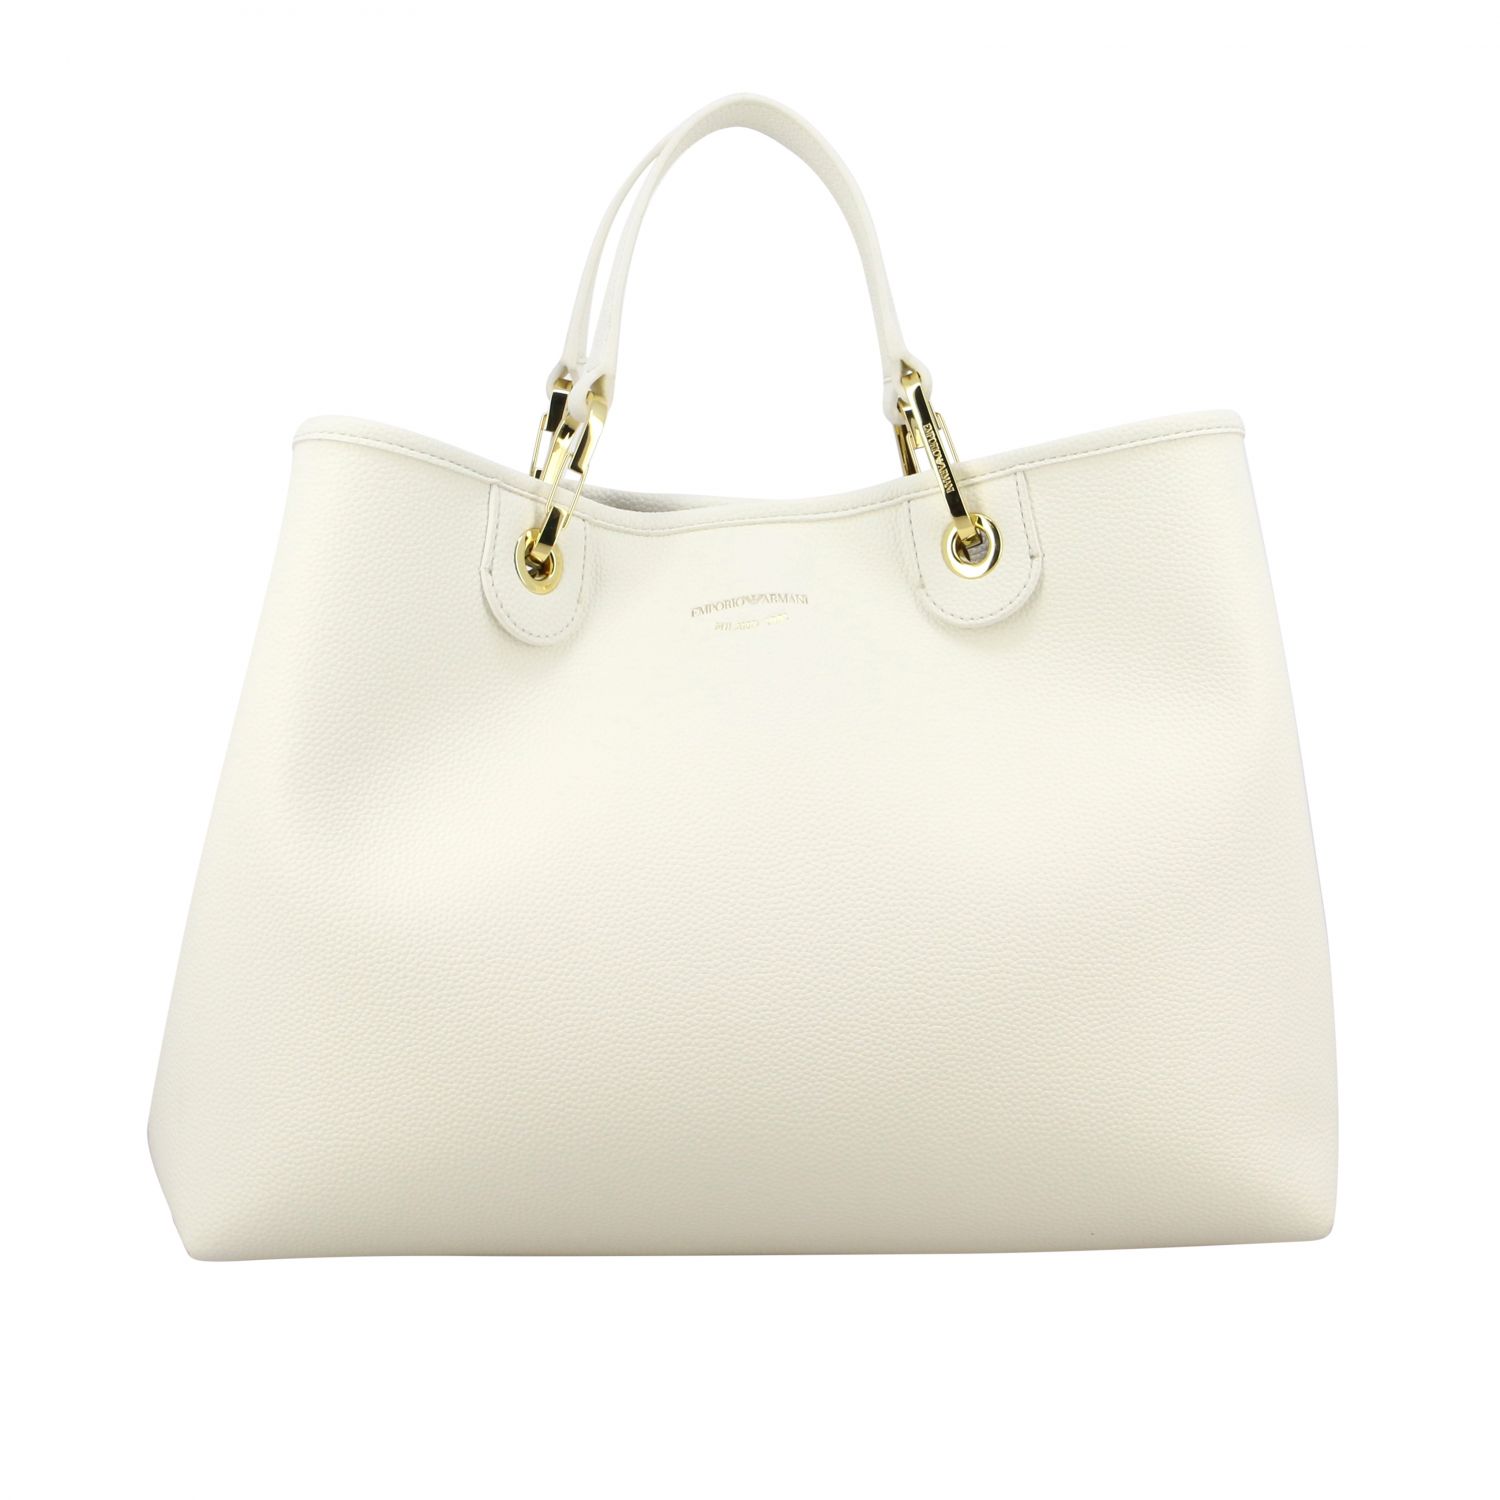 Emporio Armani Outlet: shopping bag in synthetic leather - White ...